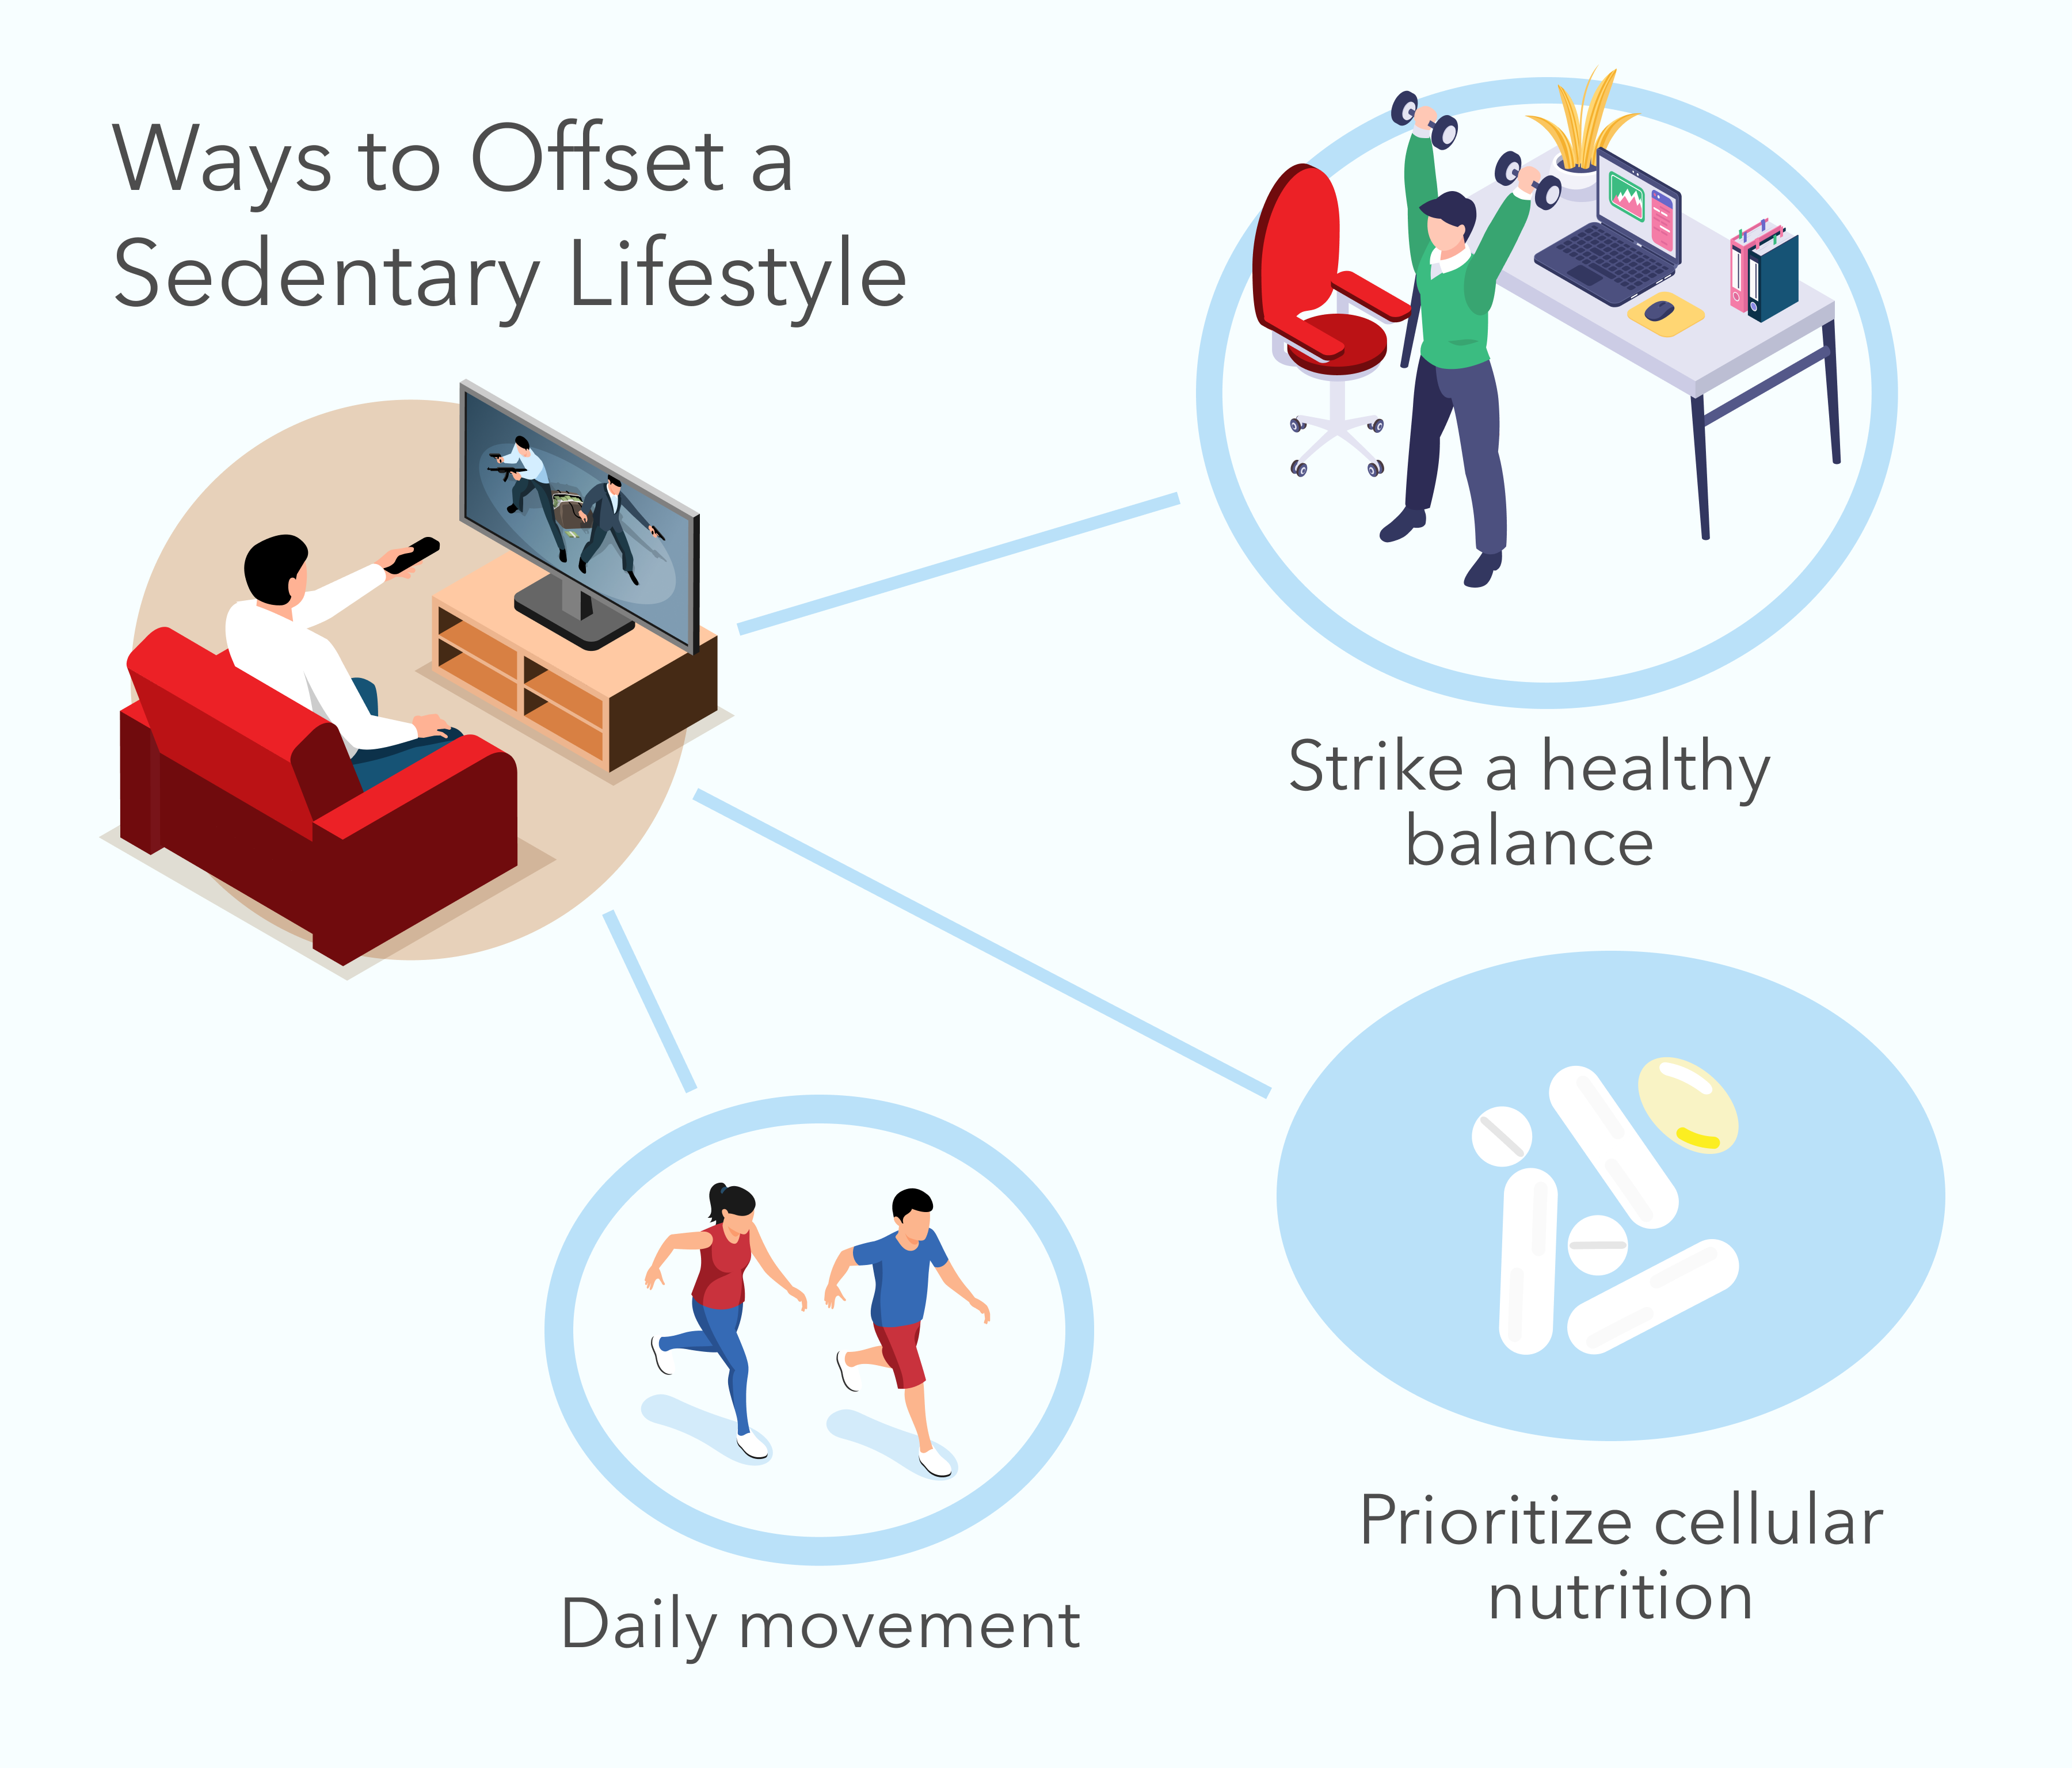 How a Sedentary Lifestyle Affects Your Cells - Solution Image